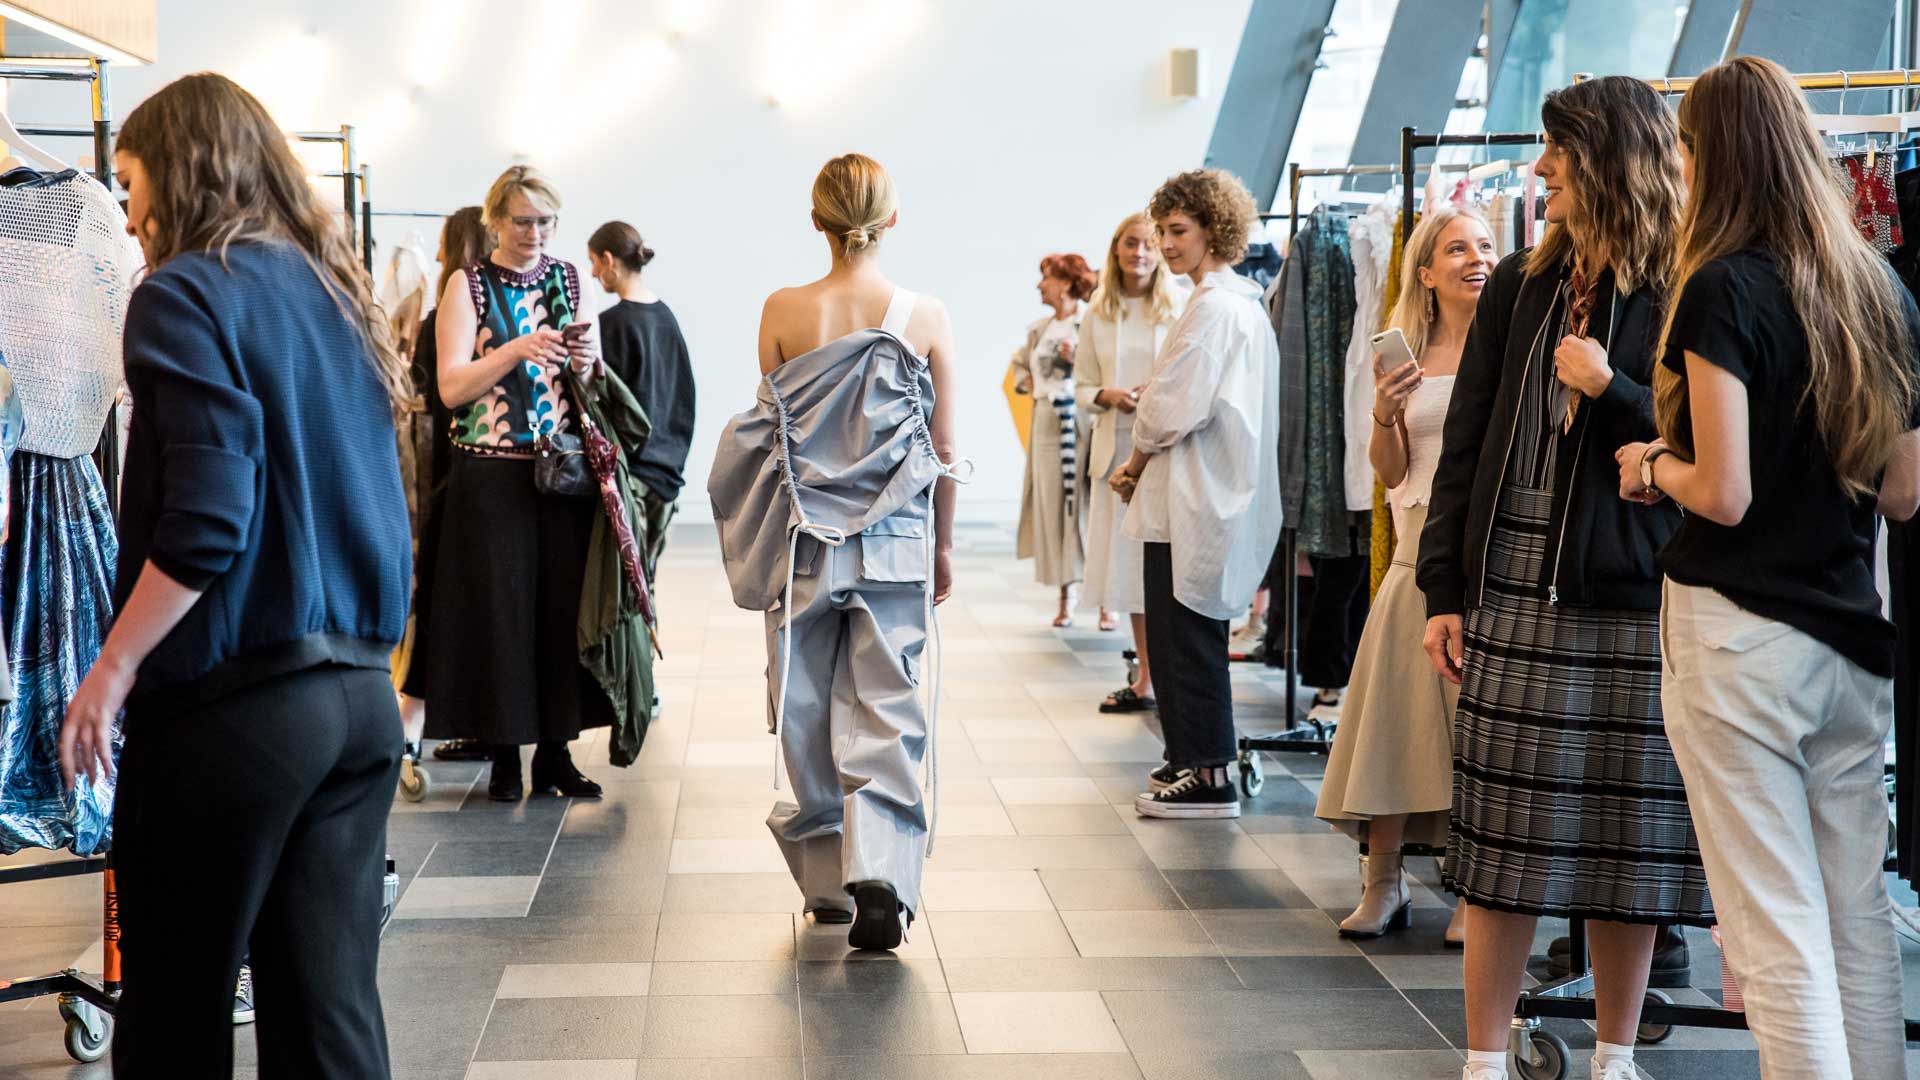 Gallery: Take a Look at the Disruptive Designs from the UTS 2017 Fashion Graduates Showcase and Runway